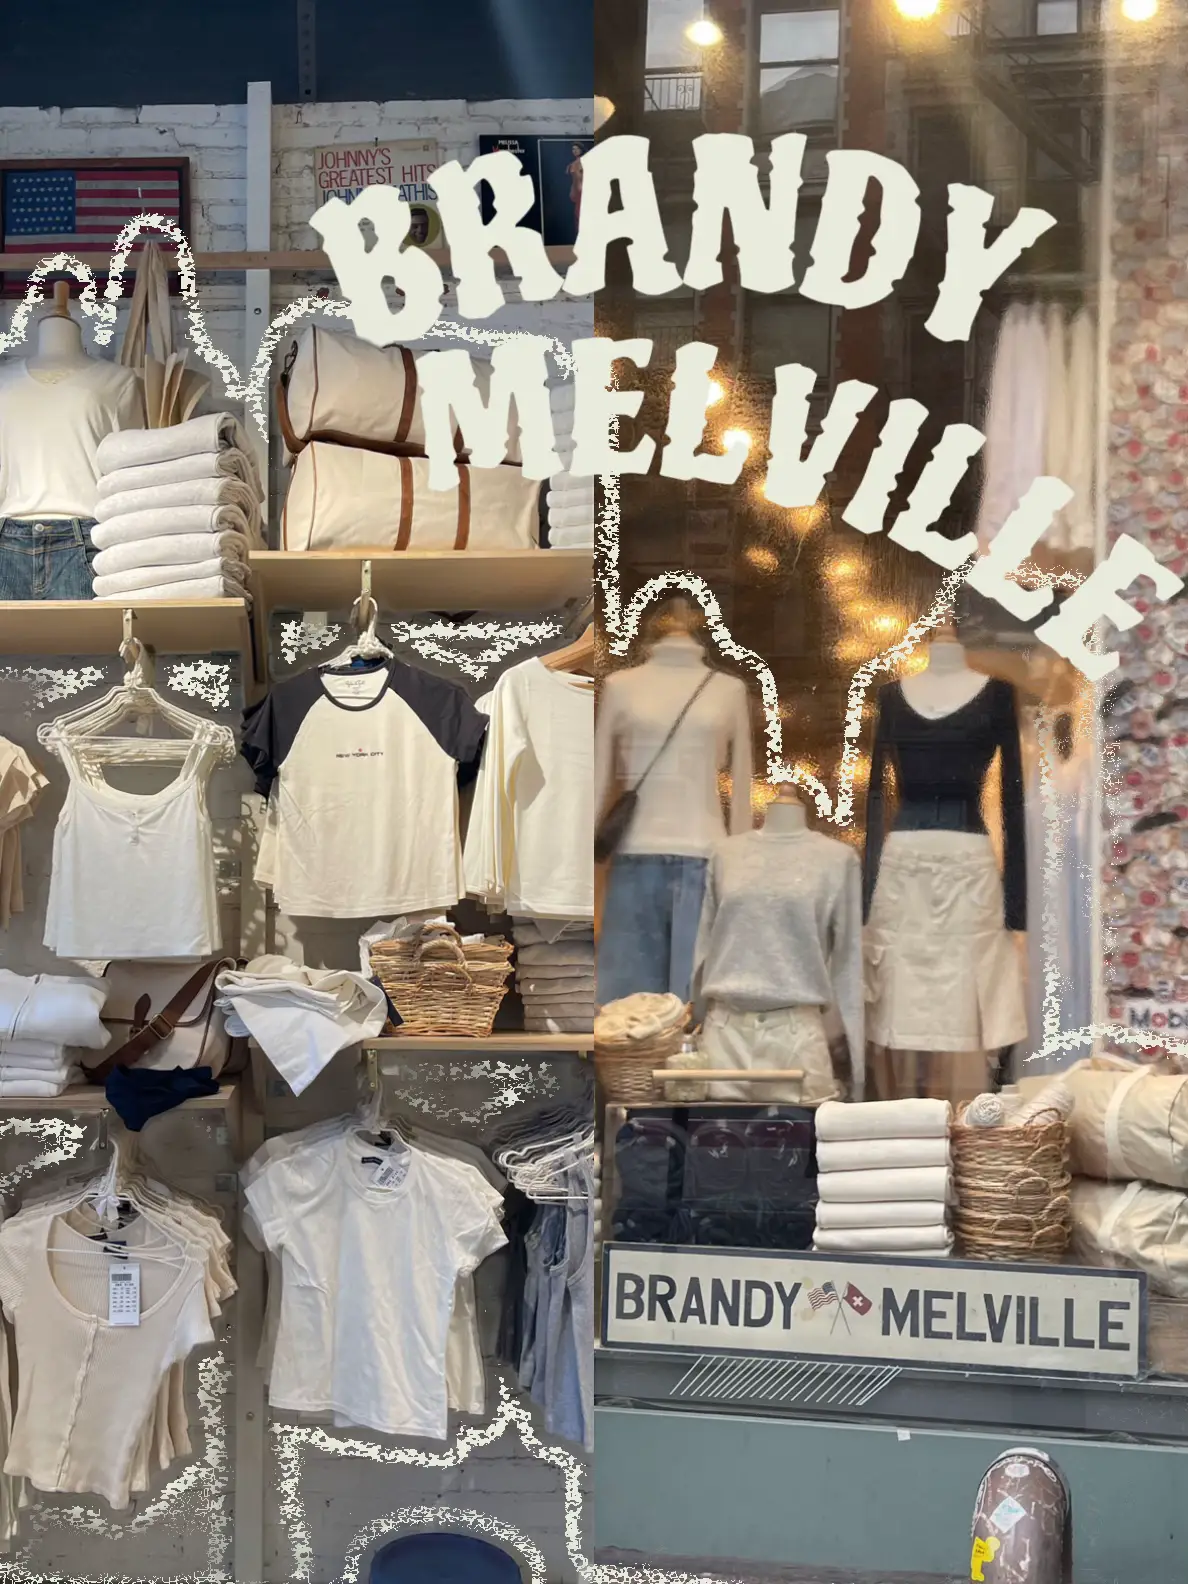 COME WITH ME [Series]: Brandy Melville Soho's images